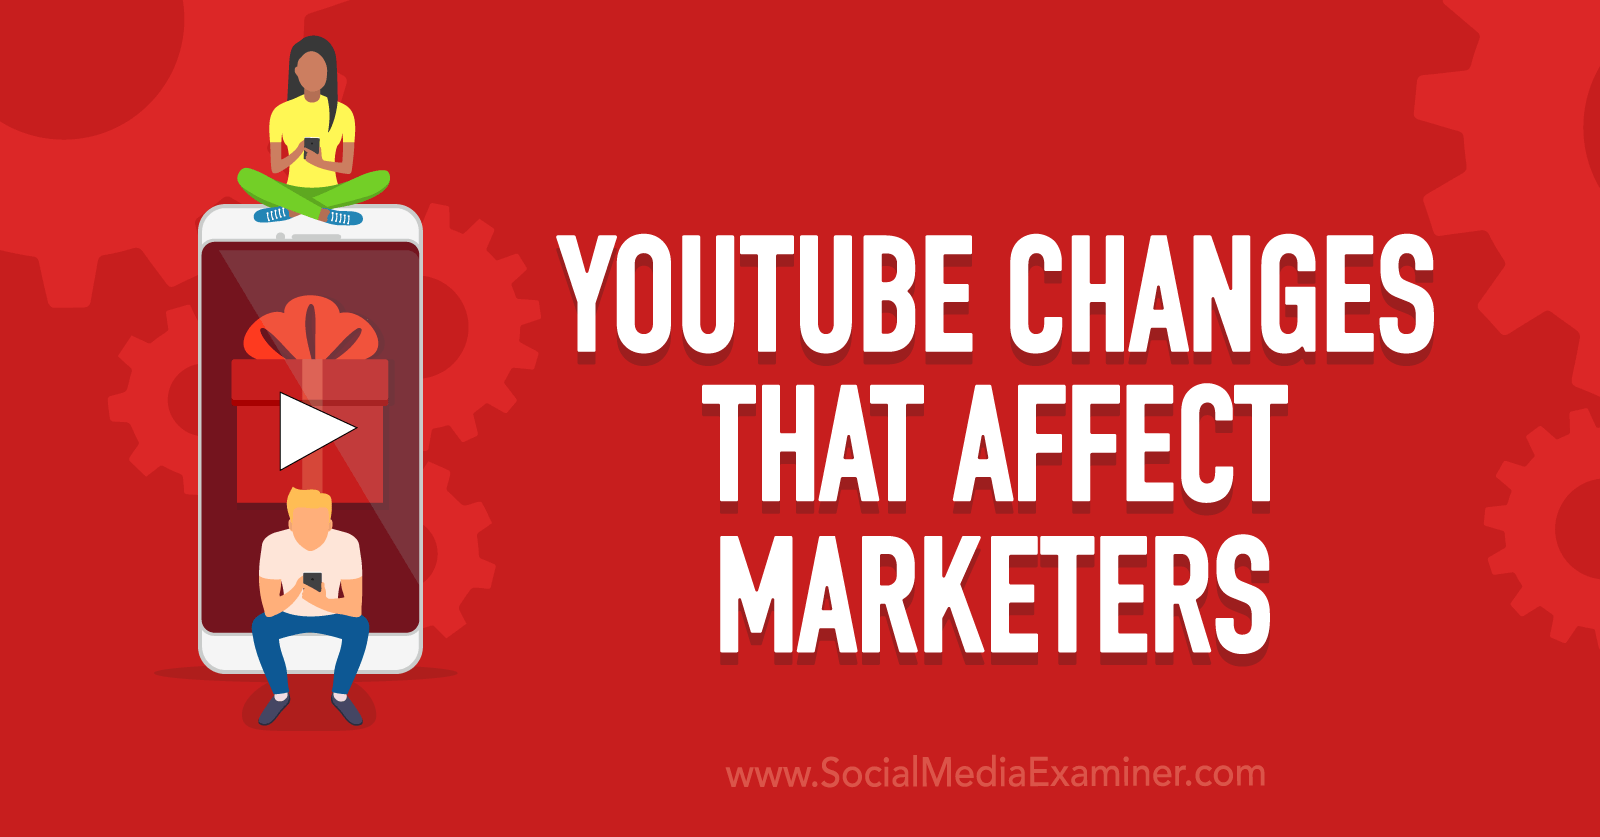 YouTube Changes That Affect Marketers by Social Media Examiner